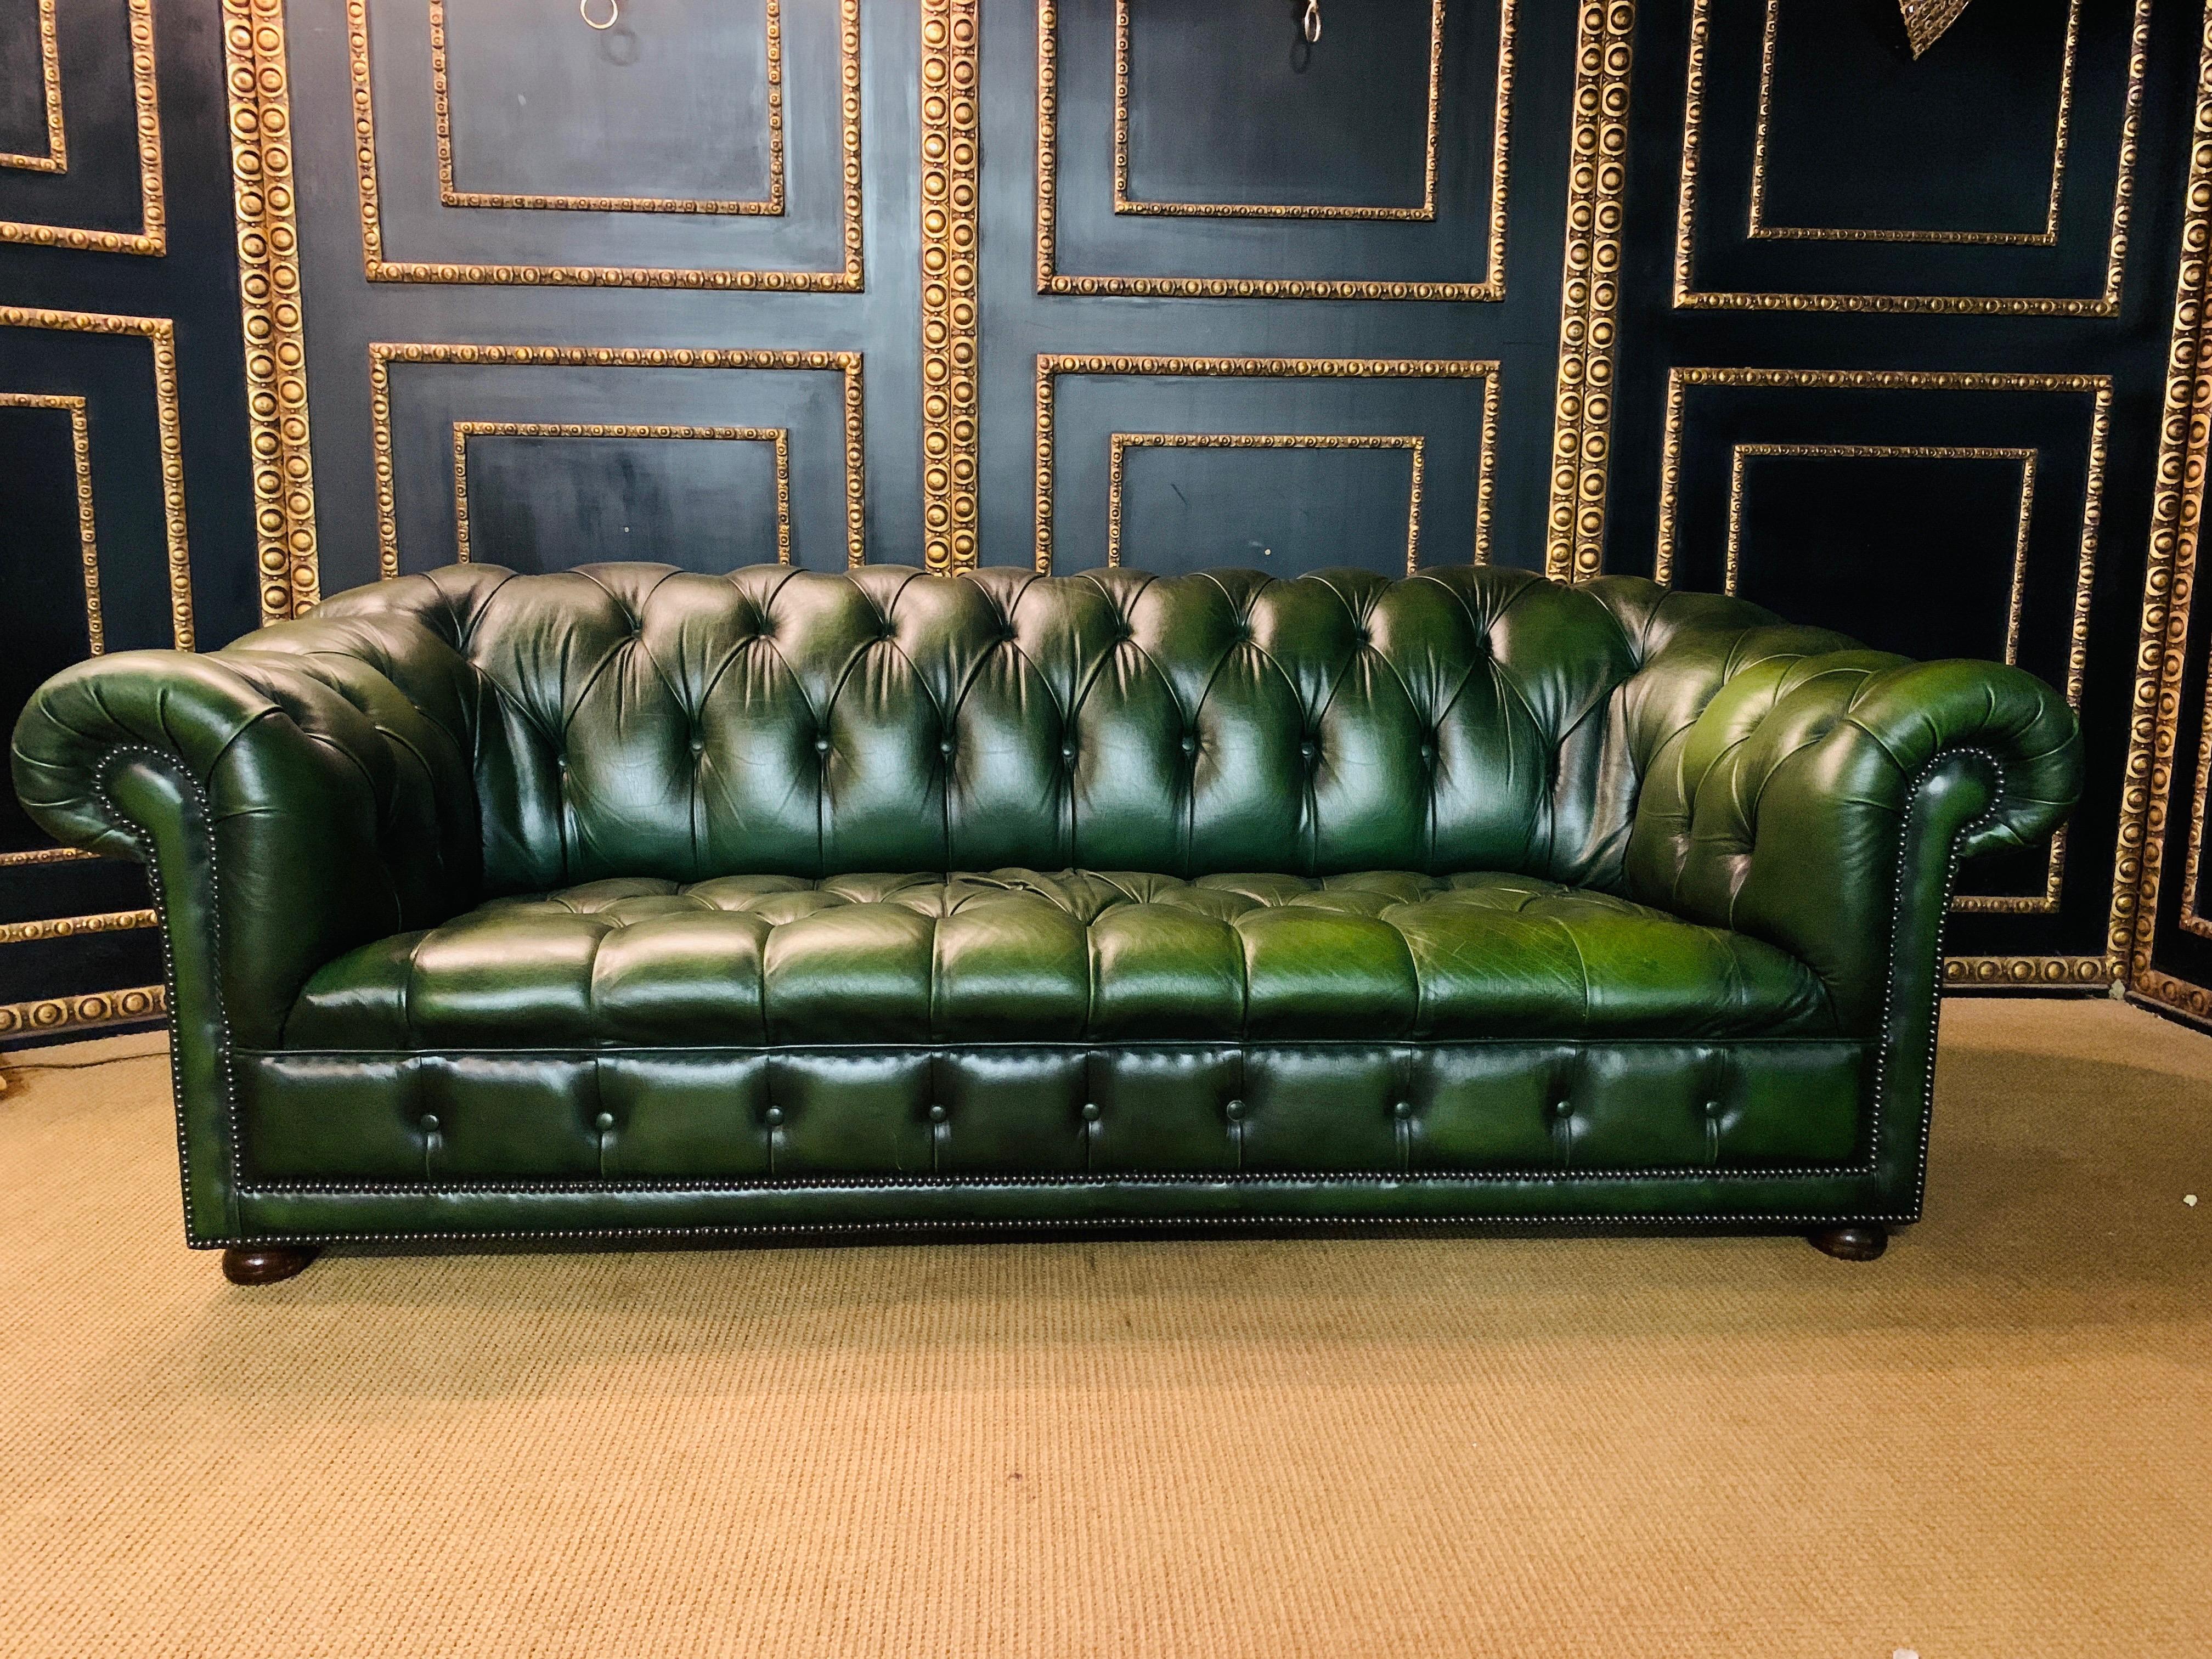 Original Chesterfield sofa, quilted seat and back strong leather. Color is green, seats are with Classic laced feather floor. Fantastic
Vintage, no cracks unique patina.
Do not miss this unique opportunity.
The missing stud can be replaced by